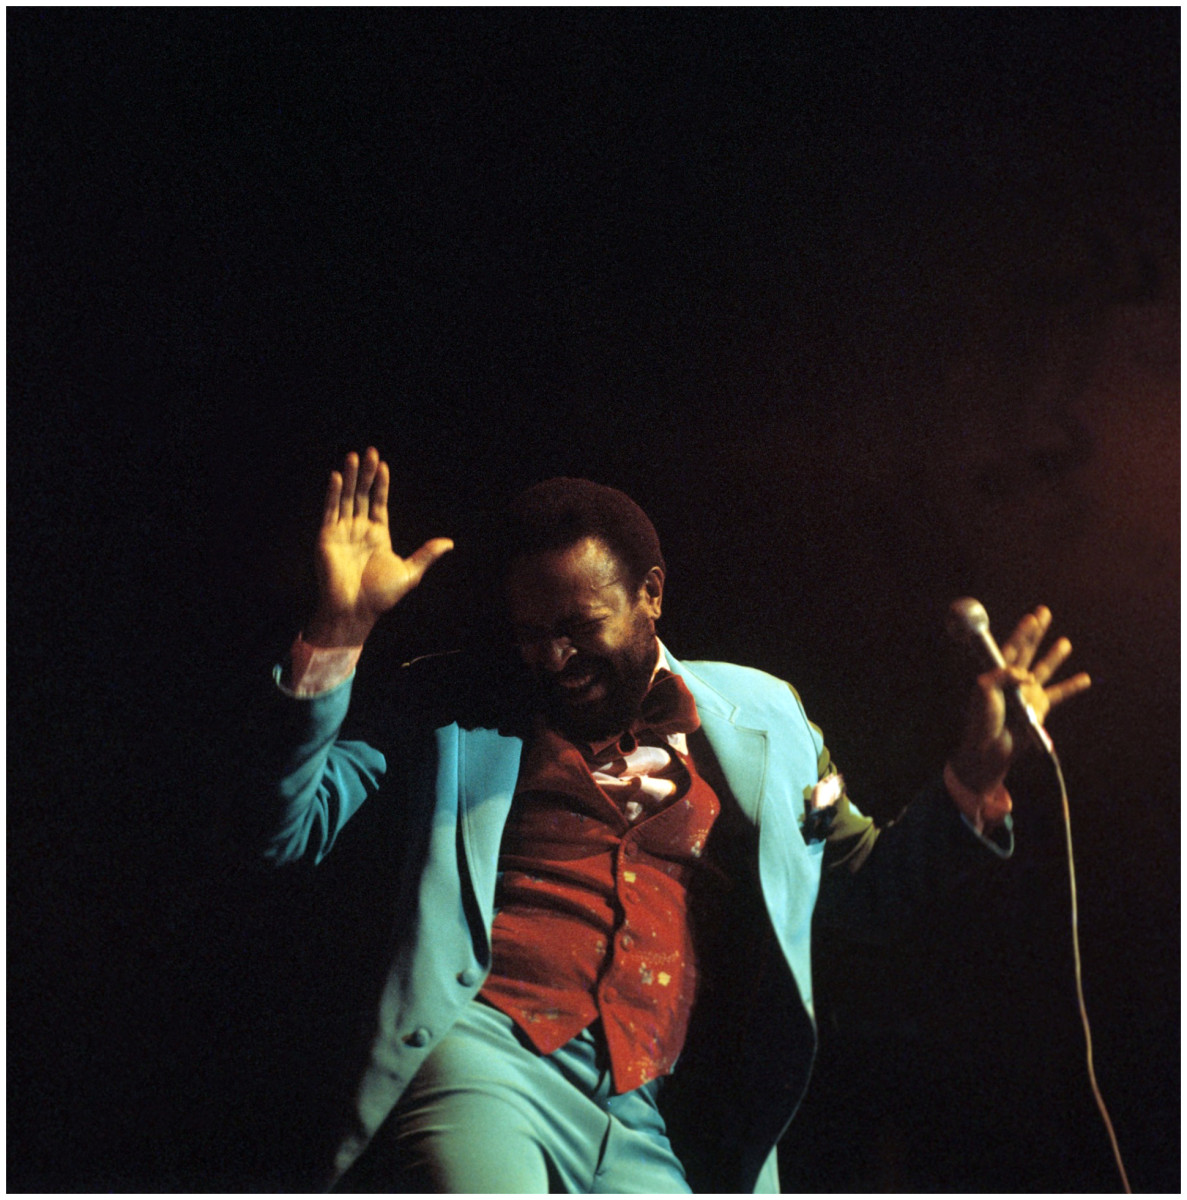 marvin-gaye-performs-on-stage-at-the-royal-albert-hall-london1976